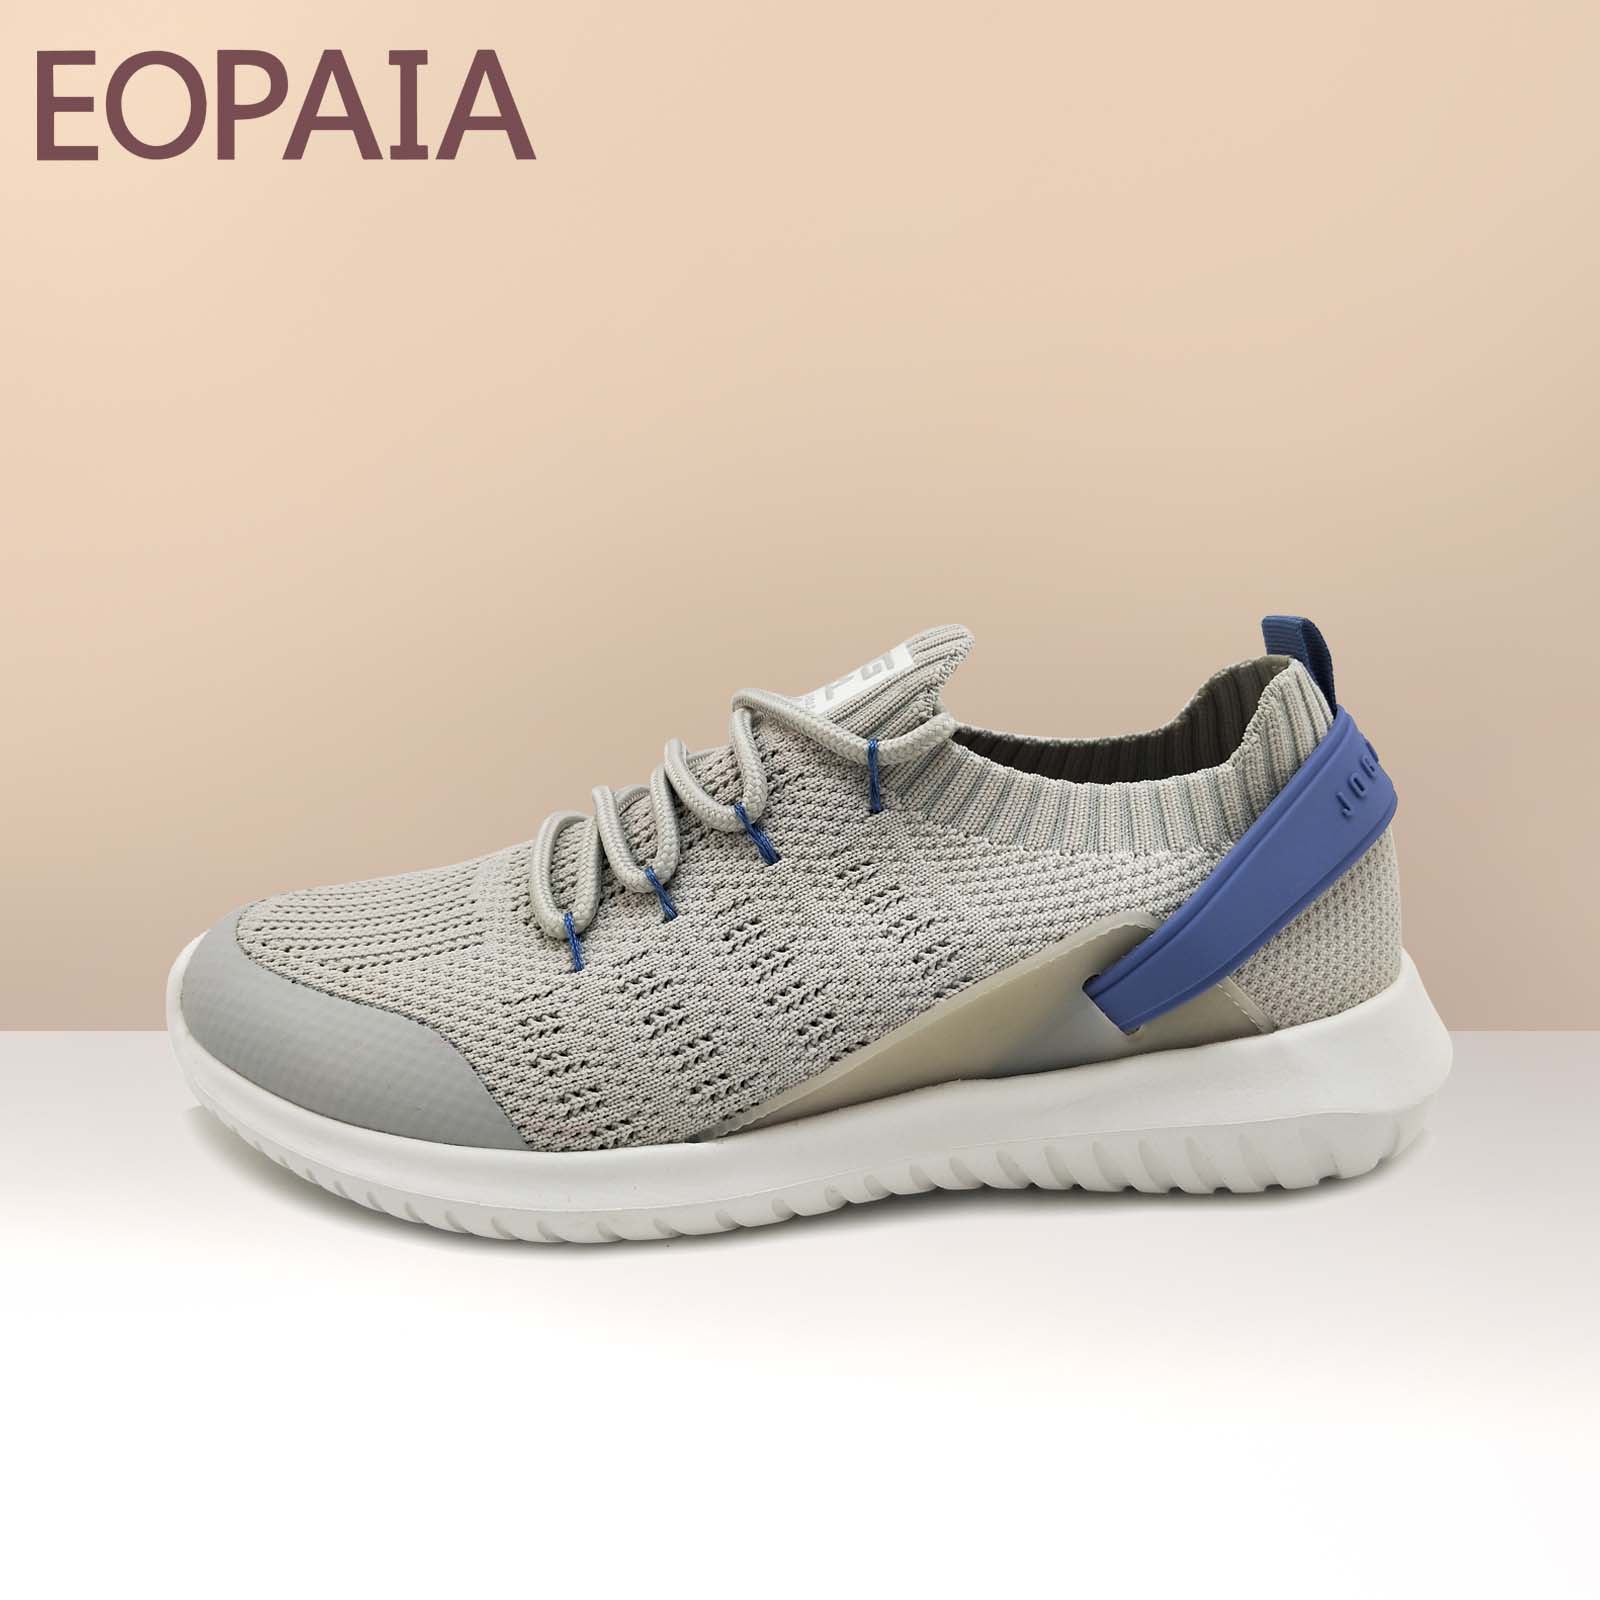 women Sport shoes Casual Fashion shoes Lace-up slip on light weight shoes